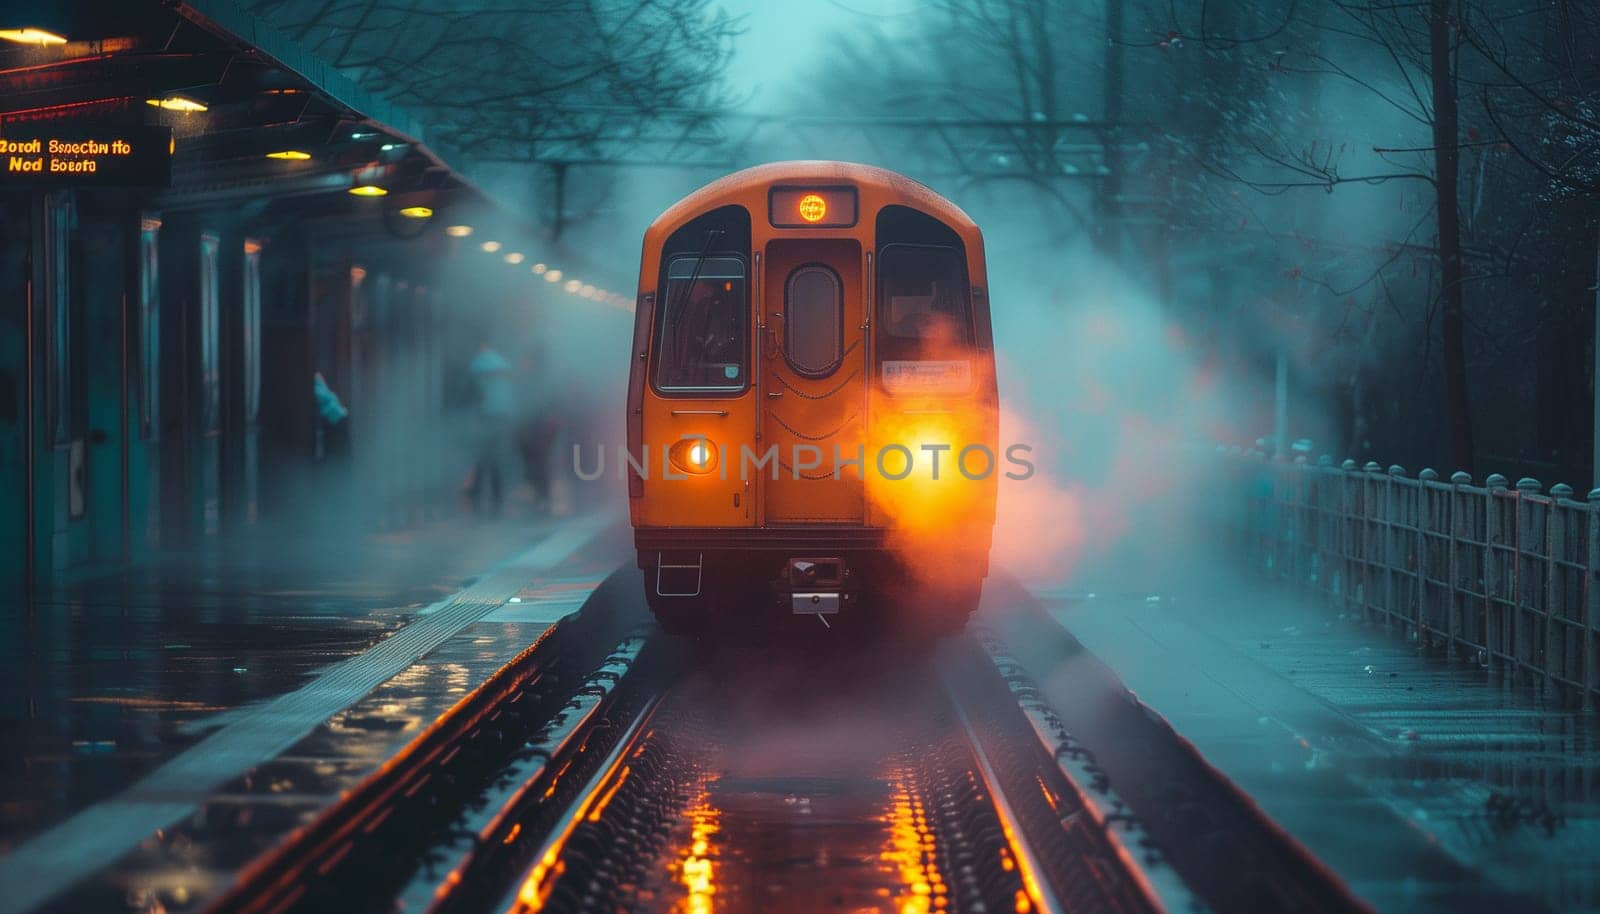 The train is in the fog by NeuroSky